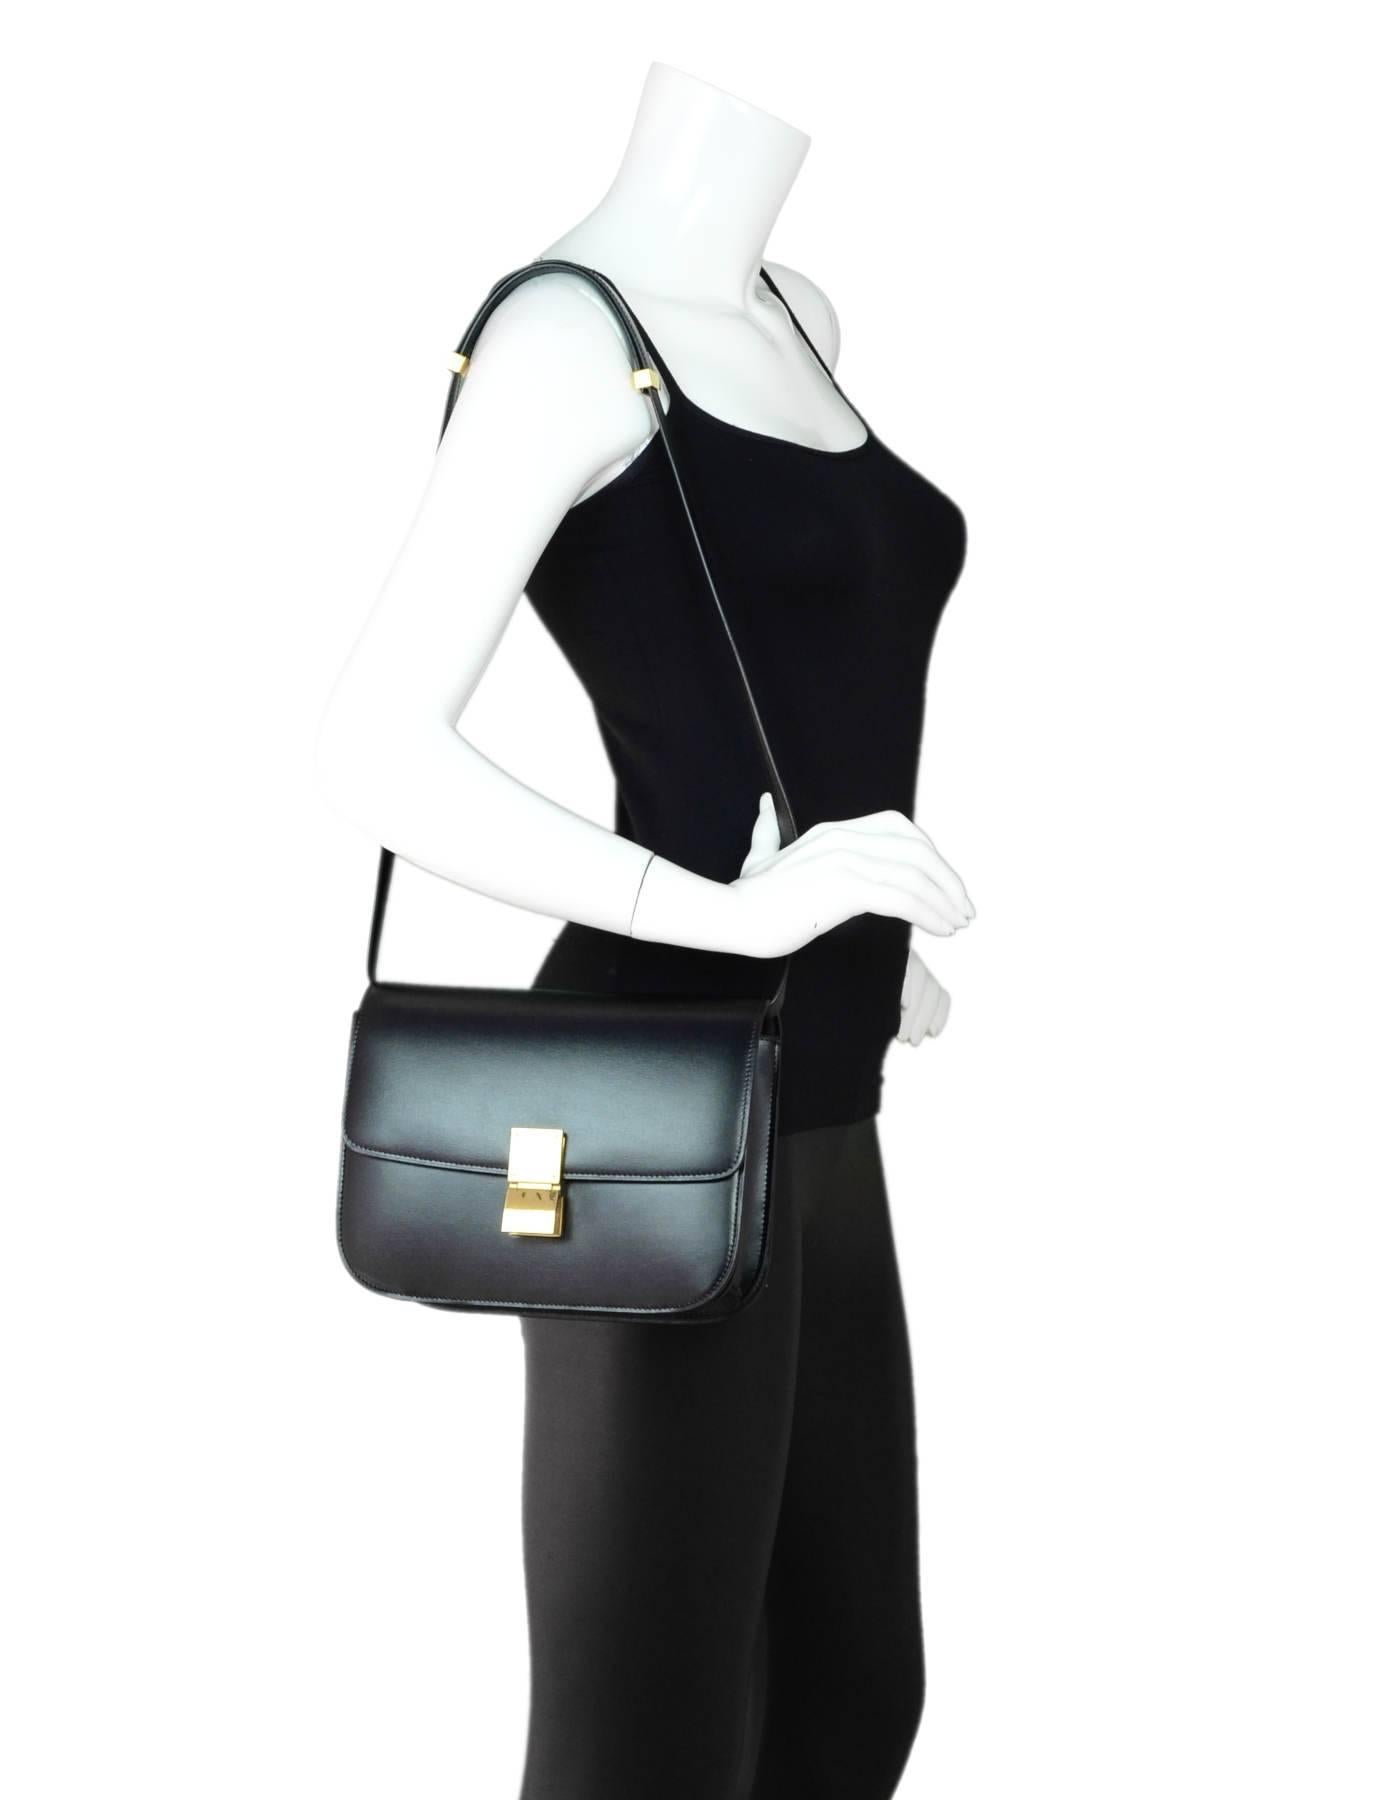 Celine Black Calfskin Medium Box Bag

Made In: Italy
Color: Black
Hardware: Goldtone
Materials: Leather, metal
Lining: Black textile
Closure/Opening: Flap top with push lock closure
Exterior Pockets: None
Interior Pockets: Two compartments with two